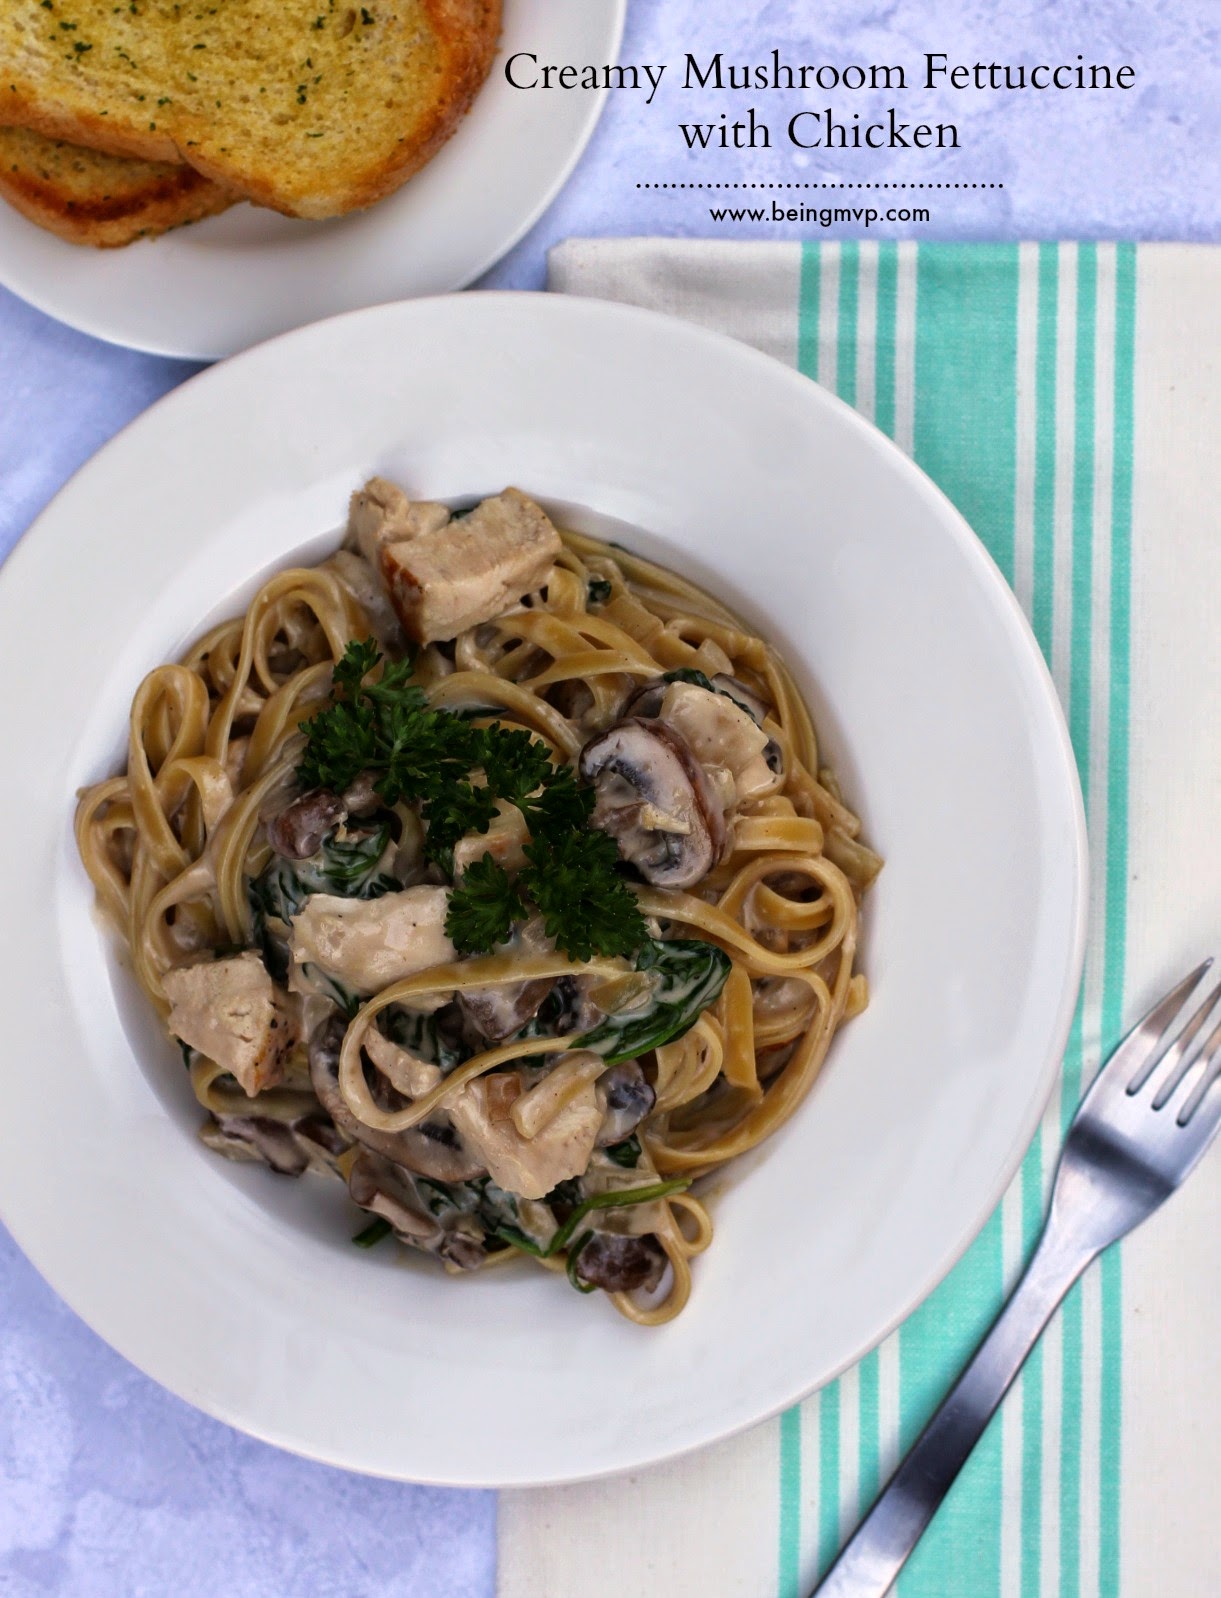 Mushrooms and chicken are a delicious classic combo for this dinner recipe!